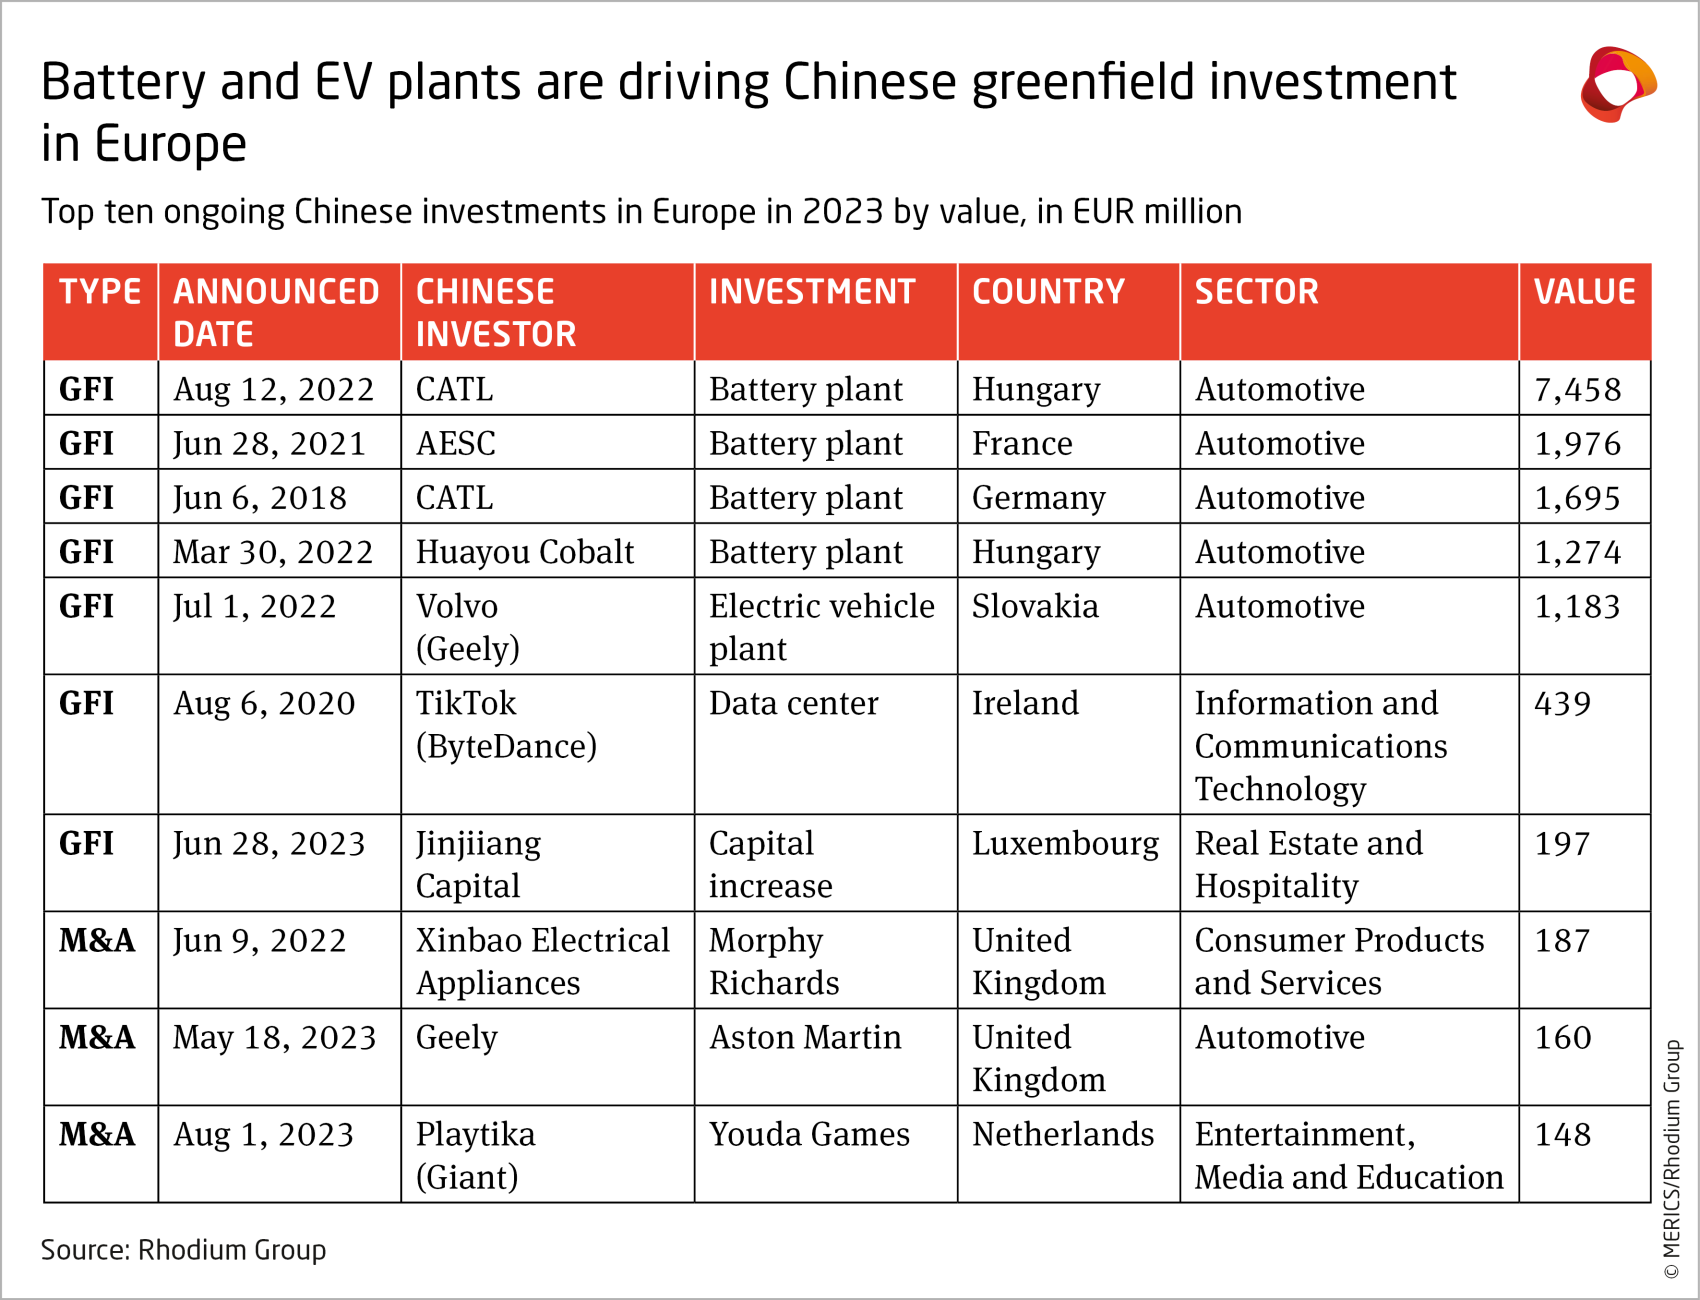 merics-rhodium-group-chinese-fdi-in-europe-2023-battery-ev-plants-are-driving-chinese-greenfield-investment-exhibit-2.png